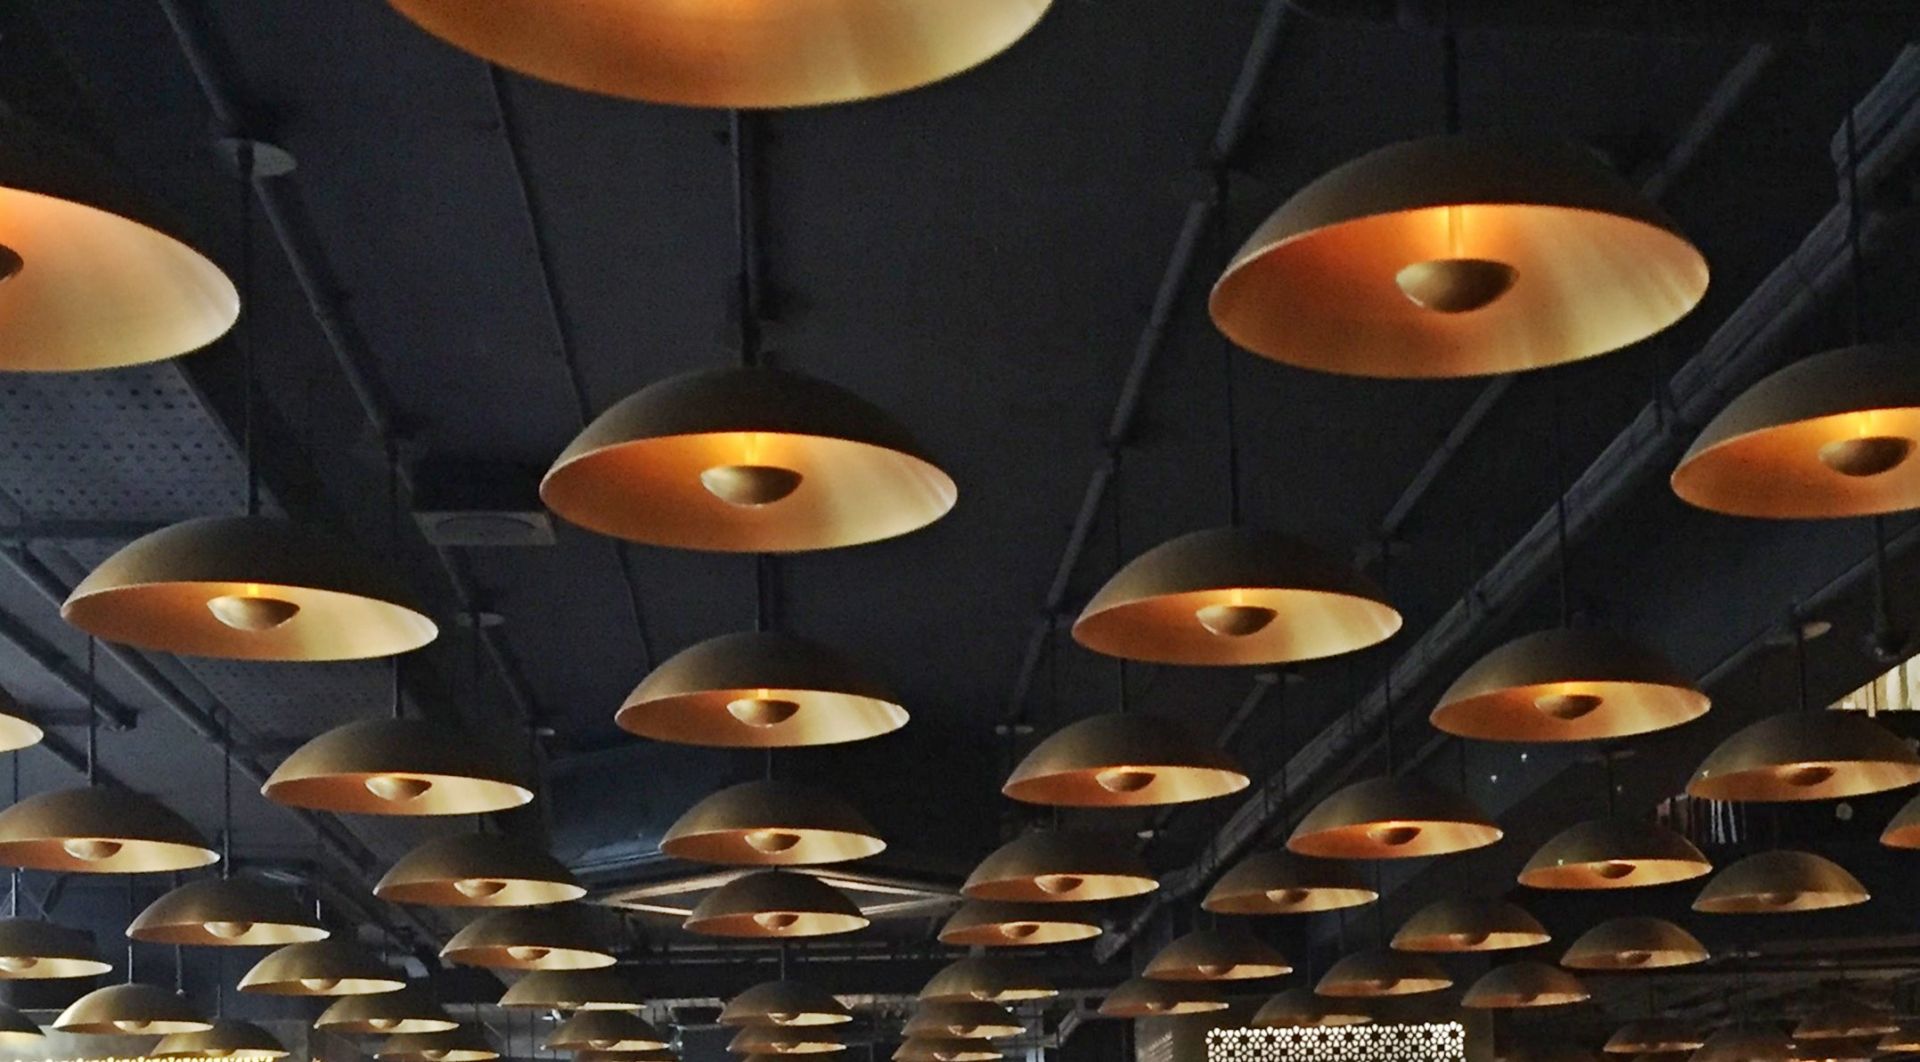 12 x Brass Effect Suspended Ceiling Light Pendant - High Quality Light Fittings With Metal Construct - Image 4 of 7